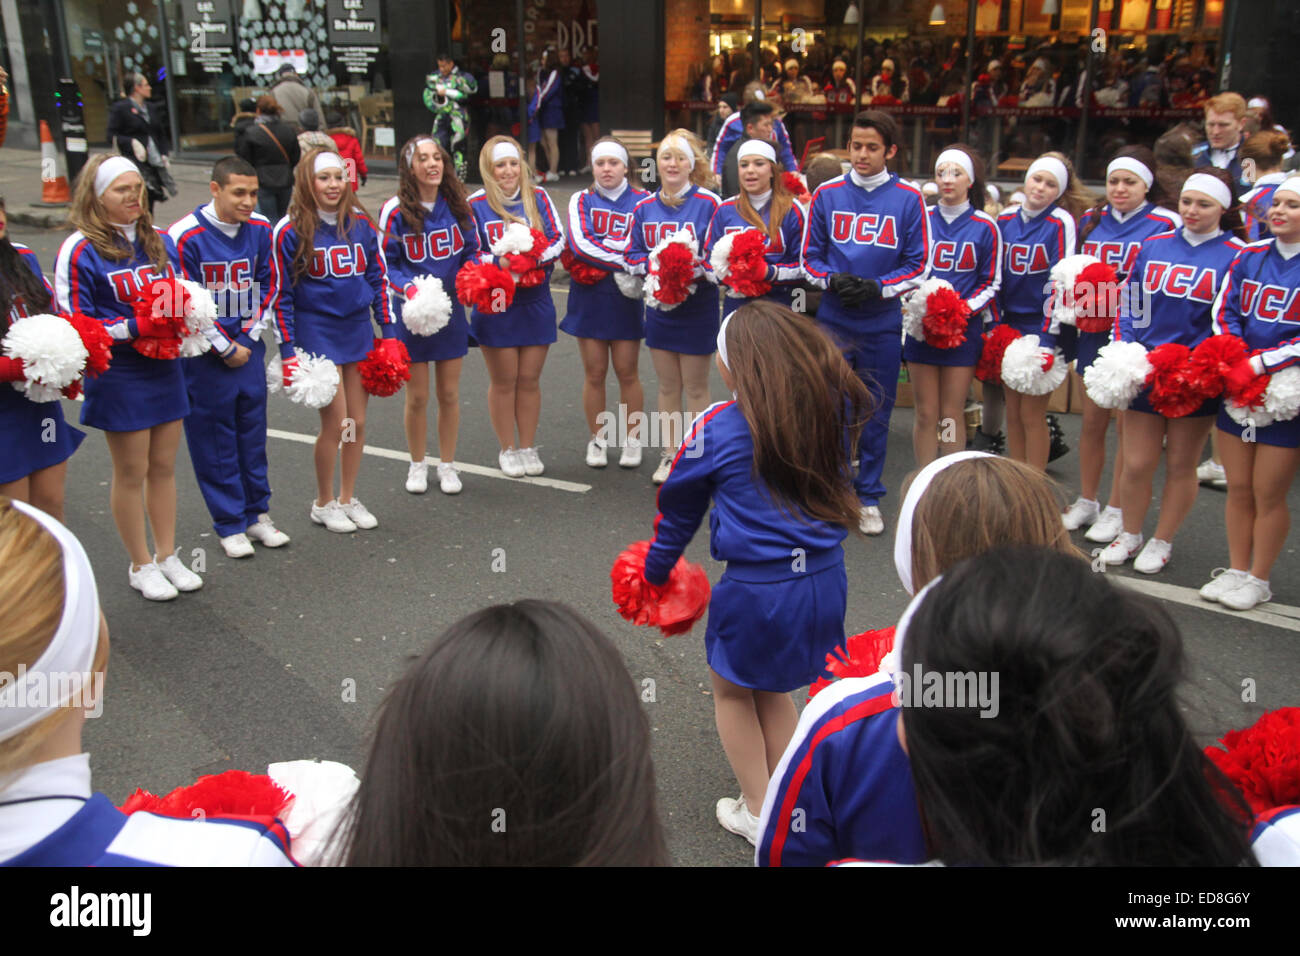 London, UK. 1 January 2015. UCA cheer leaders rehearse ahead of the London New years parade. Londoners and tourists turned up in droves for the new years parade. The annual parade goes through Piccadilly, Regents street, Pall Mall and Whitehall a 2 mile route. Photo: David Mbiyu/ Alamy Live News Stock Photo